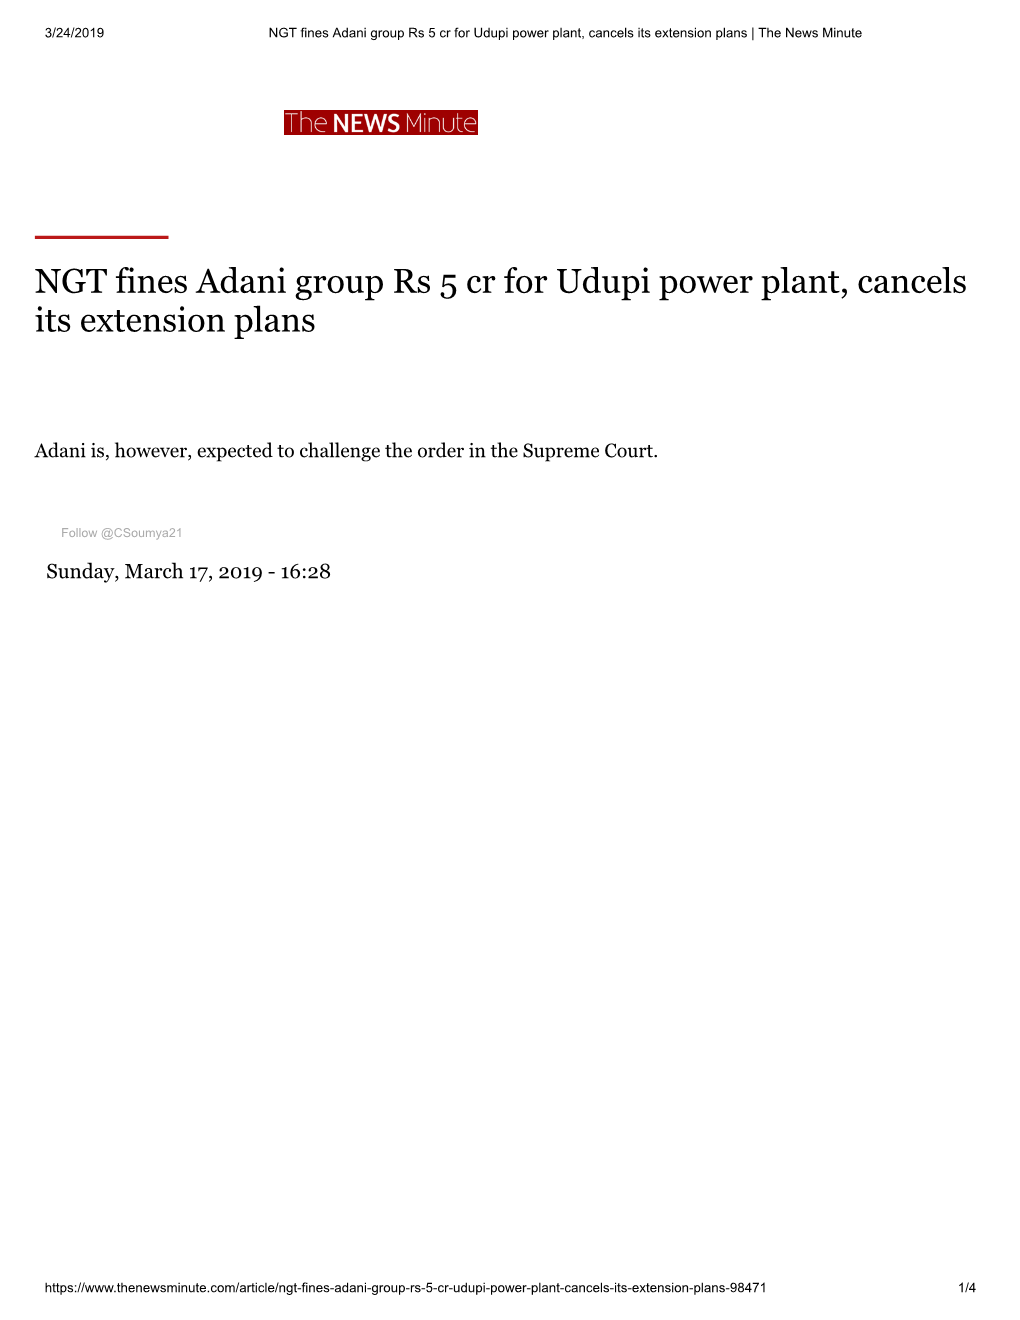 NGT Fines Adani Group Rs 5 Cr for Udupi Power Plant, Cancels Its Extension Plans | the News Minute